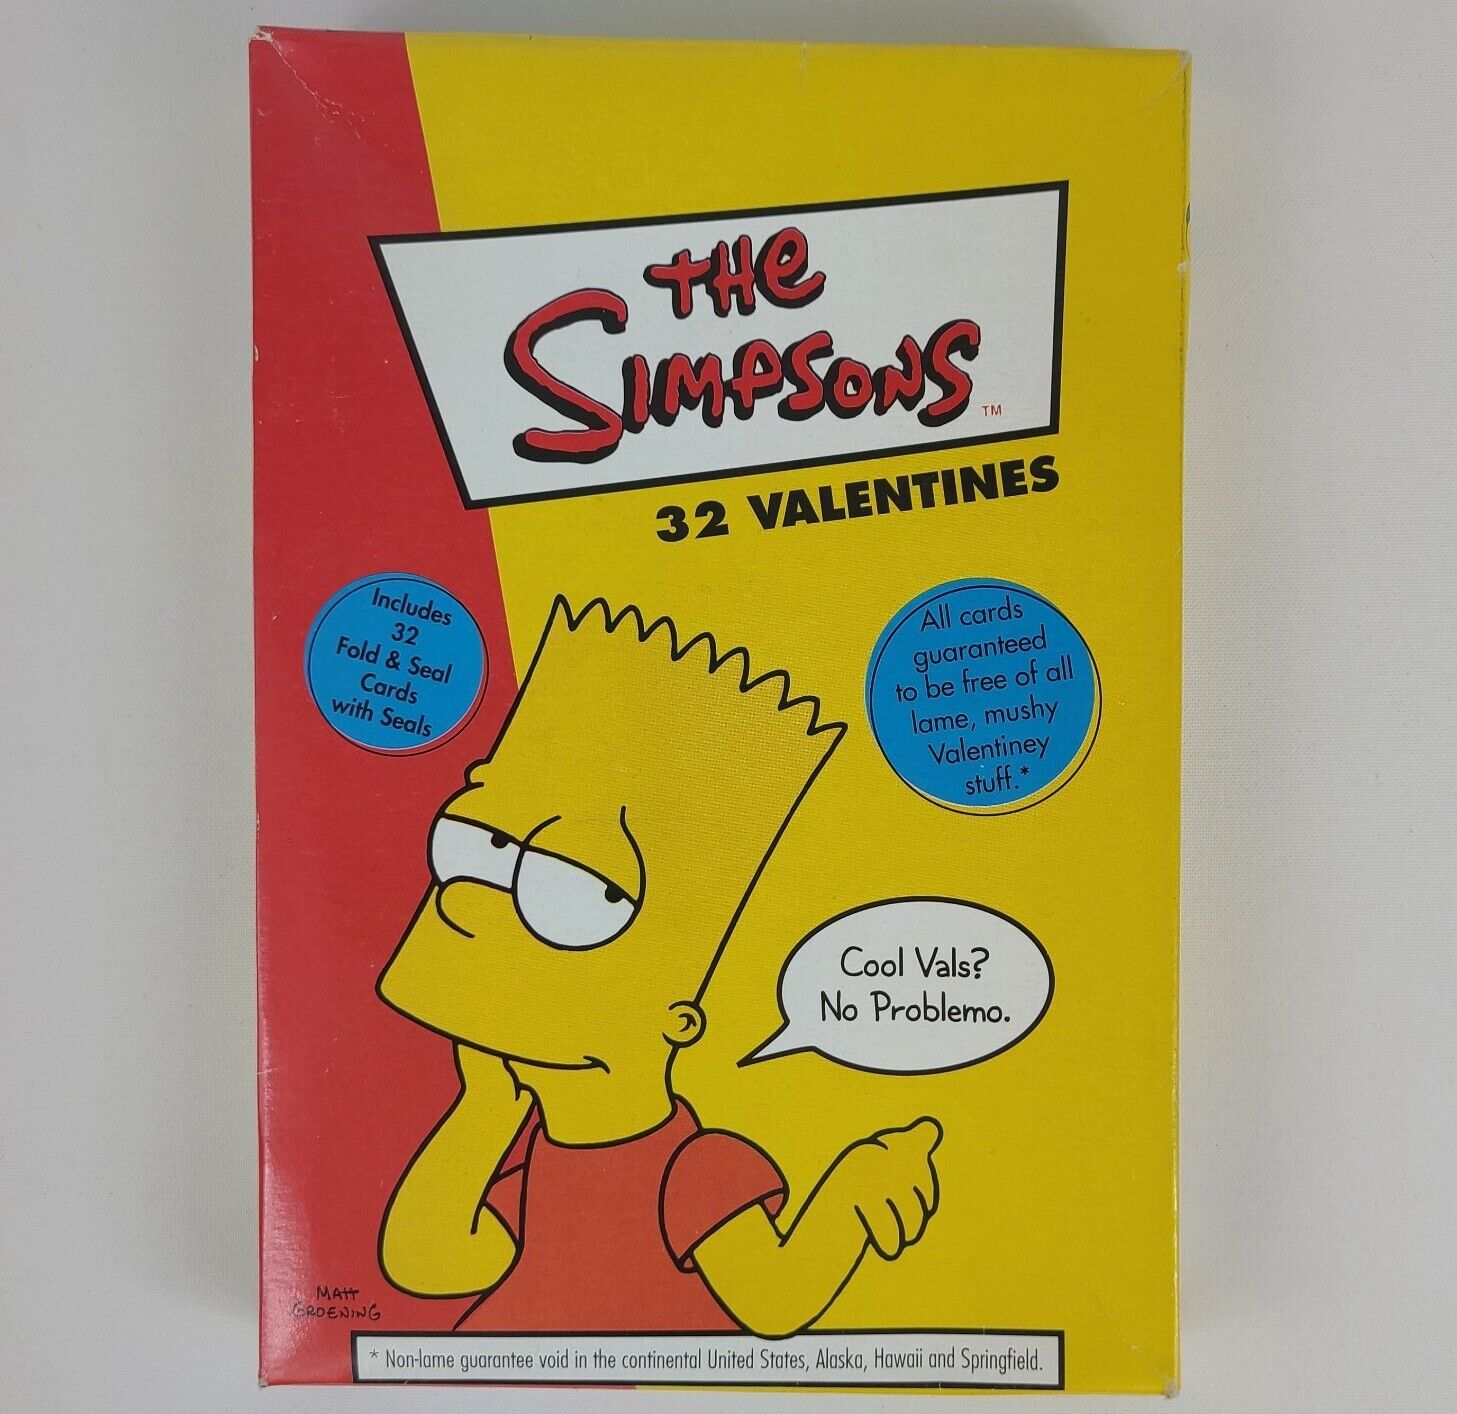 The Simpsons Valentine\'s Day Cards - 32 New In Box 2002 Vintage Cards